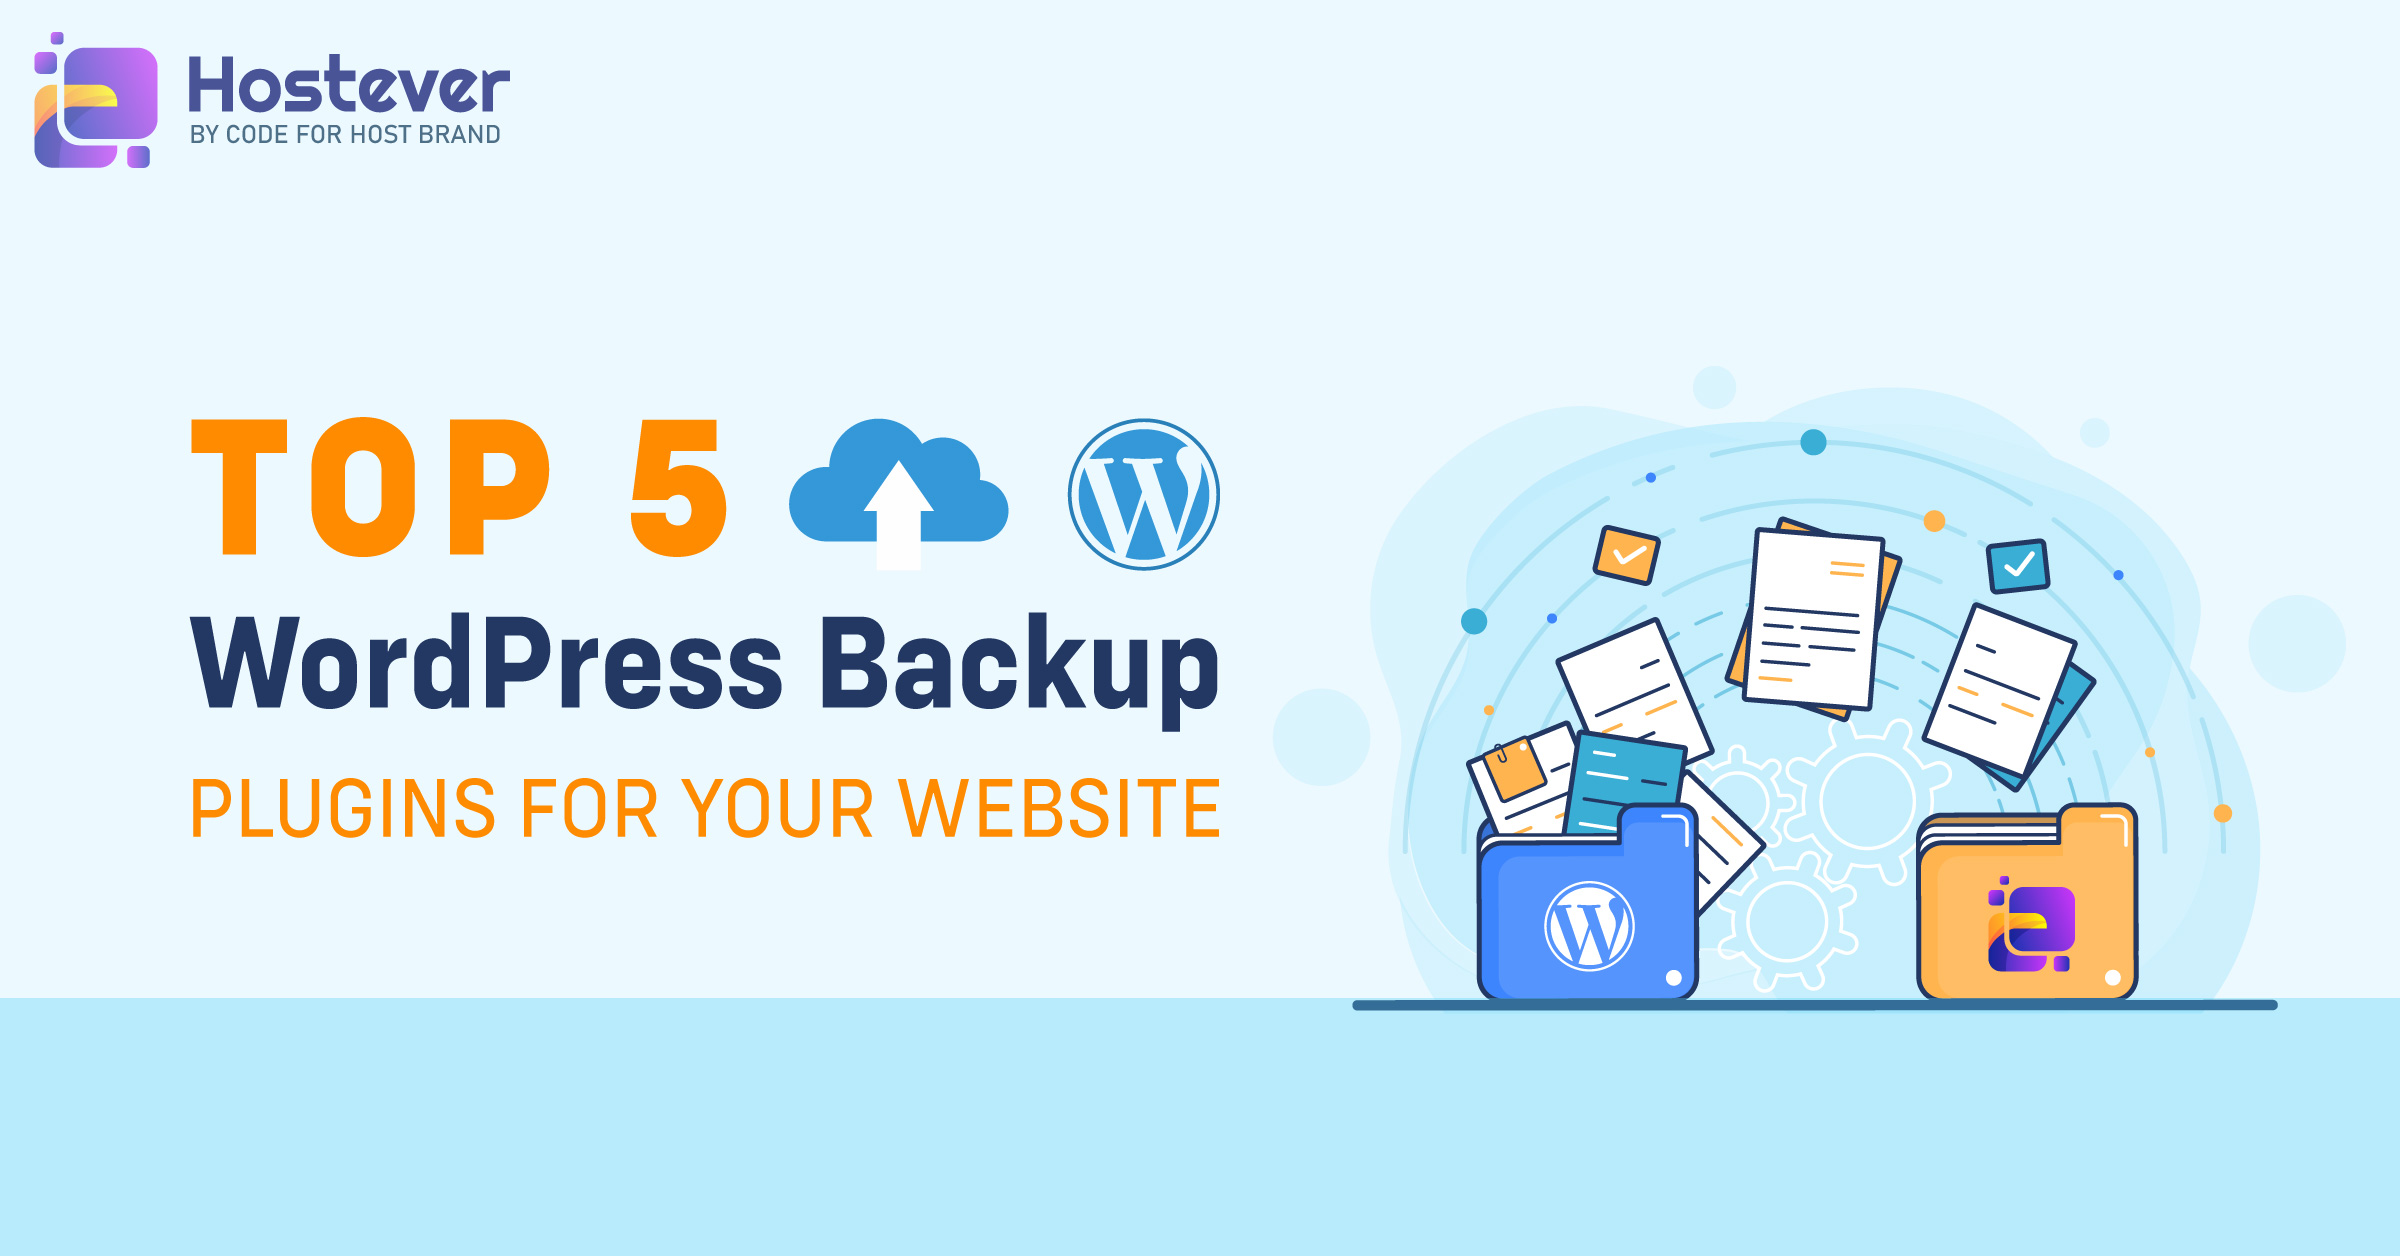 The Top 5 WordPress Backup Plugins for Your Website